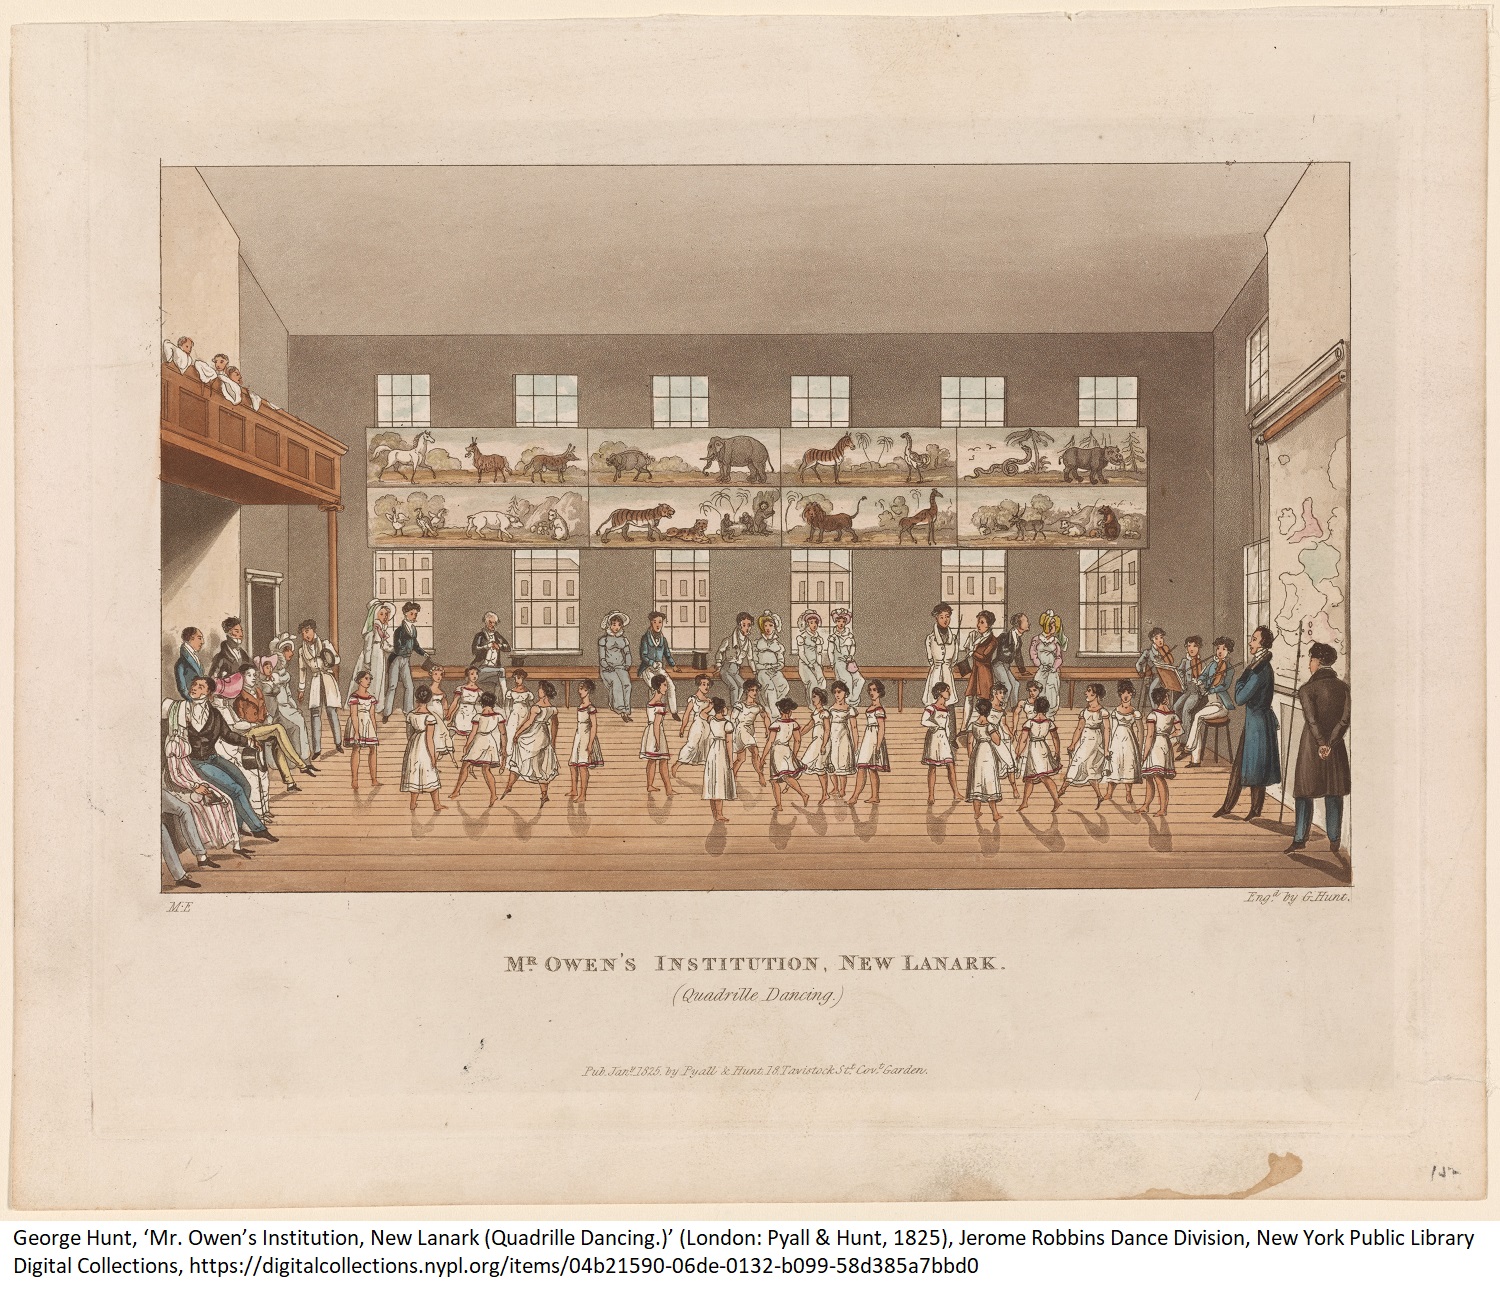 George Hunt, ‘Mr. Owen’s Institution, New Lanark (Quadrille Dancing.)’ (London: Pyall & Hunt, 1825), Jerome Robbins Dance Division, New York Public Library Digital Collections, https://digitalcollections.nypl.org/items/04b21590-06de-0132-b099-58d385a7bbd0 